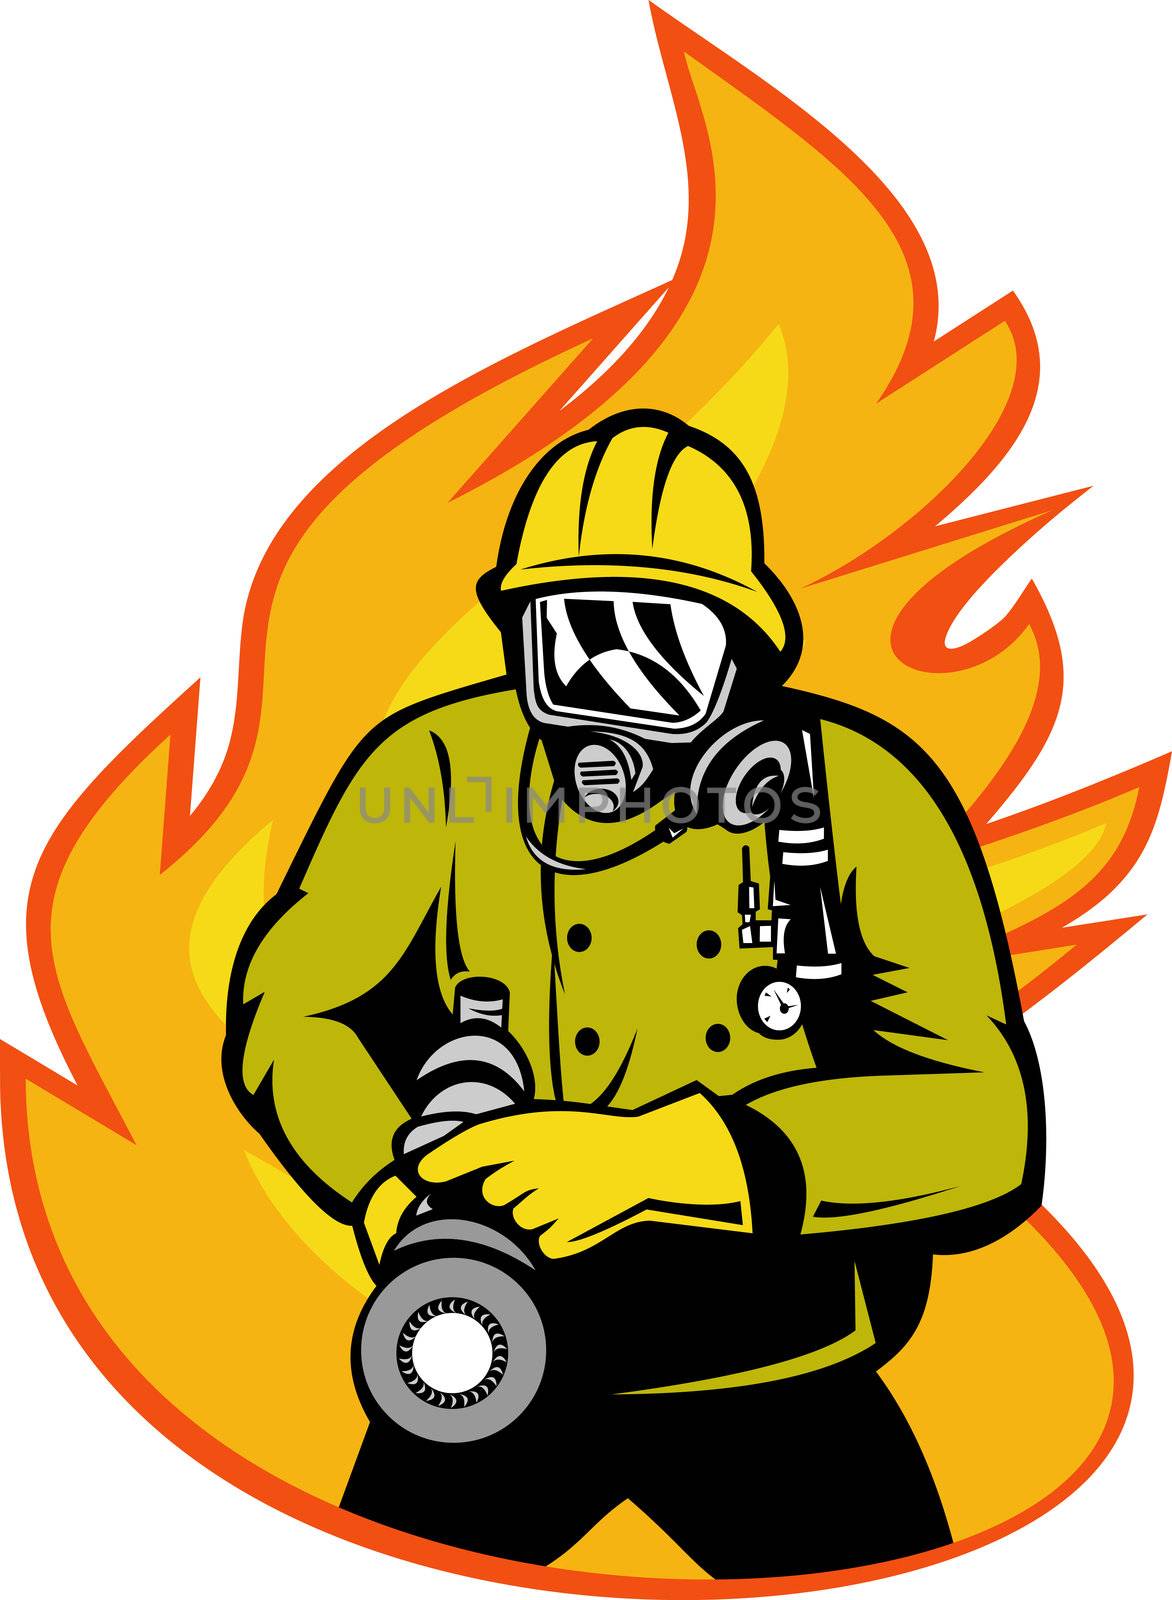 illustration of a Fireman or firefighter with fire hose and fire in the background.